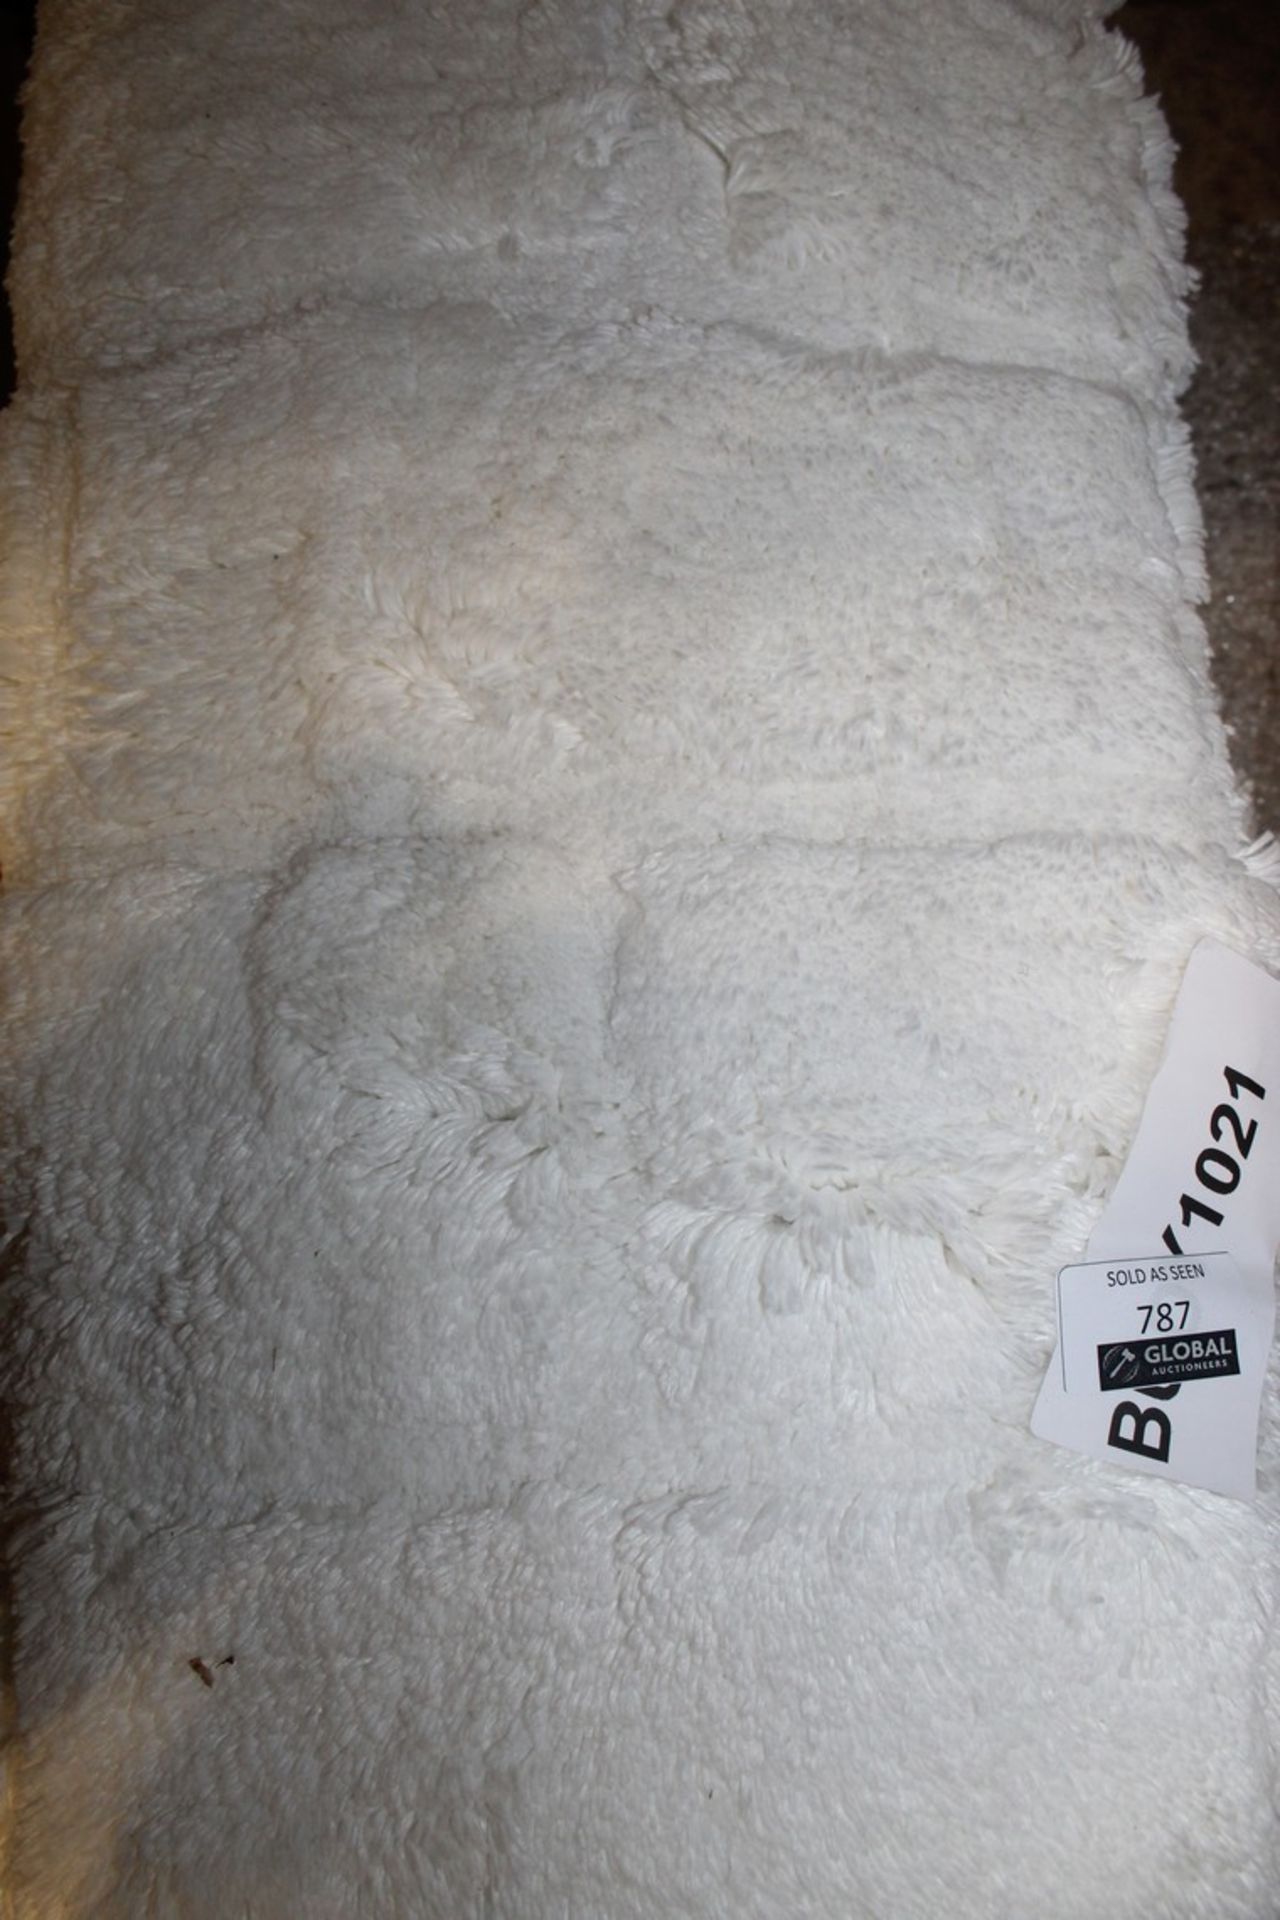 Lot to Contain 3 Assorted Super Absorbent Bath Mats Combined RRP £90 (12800) (Appraisals Are